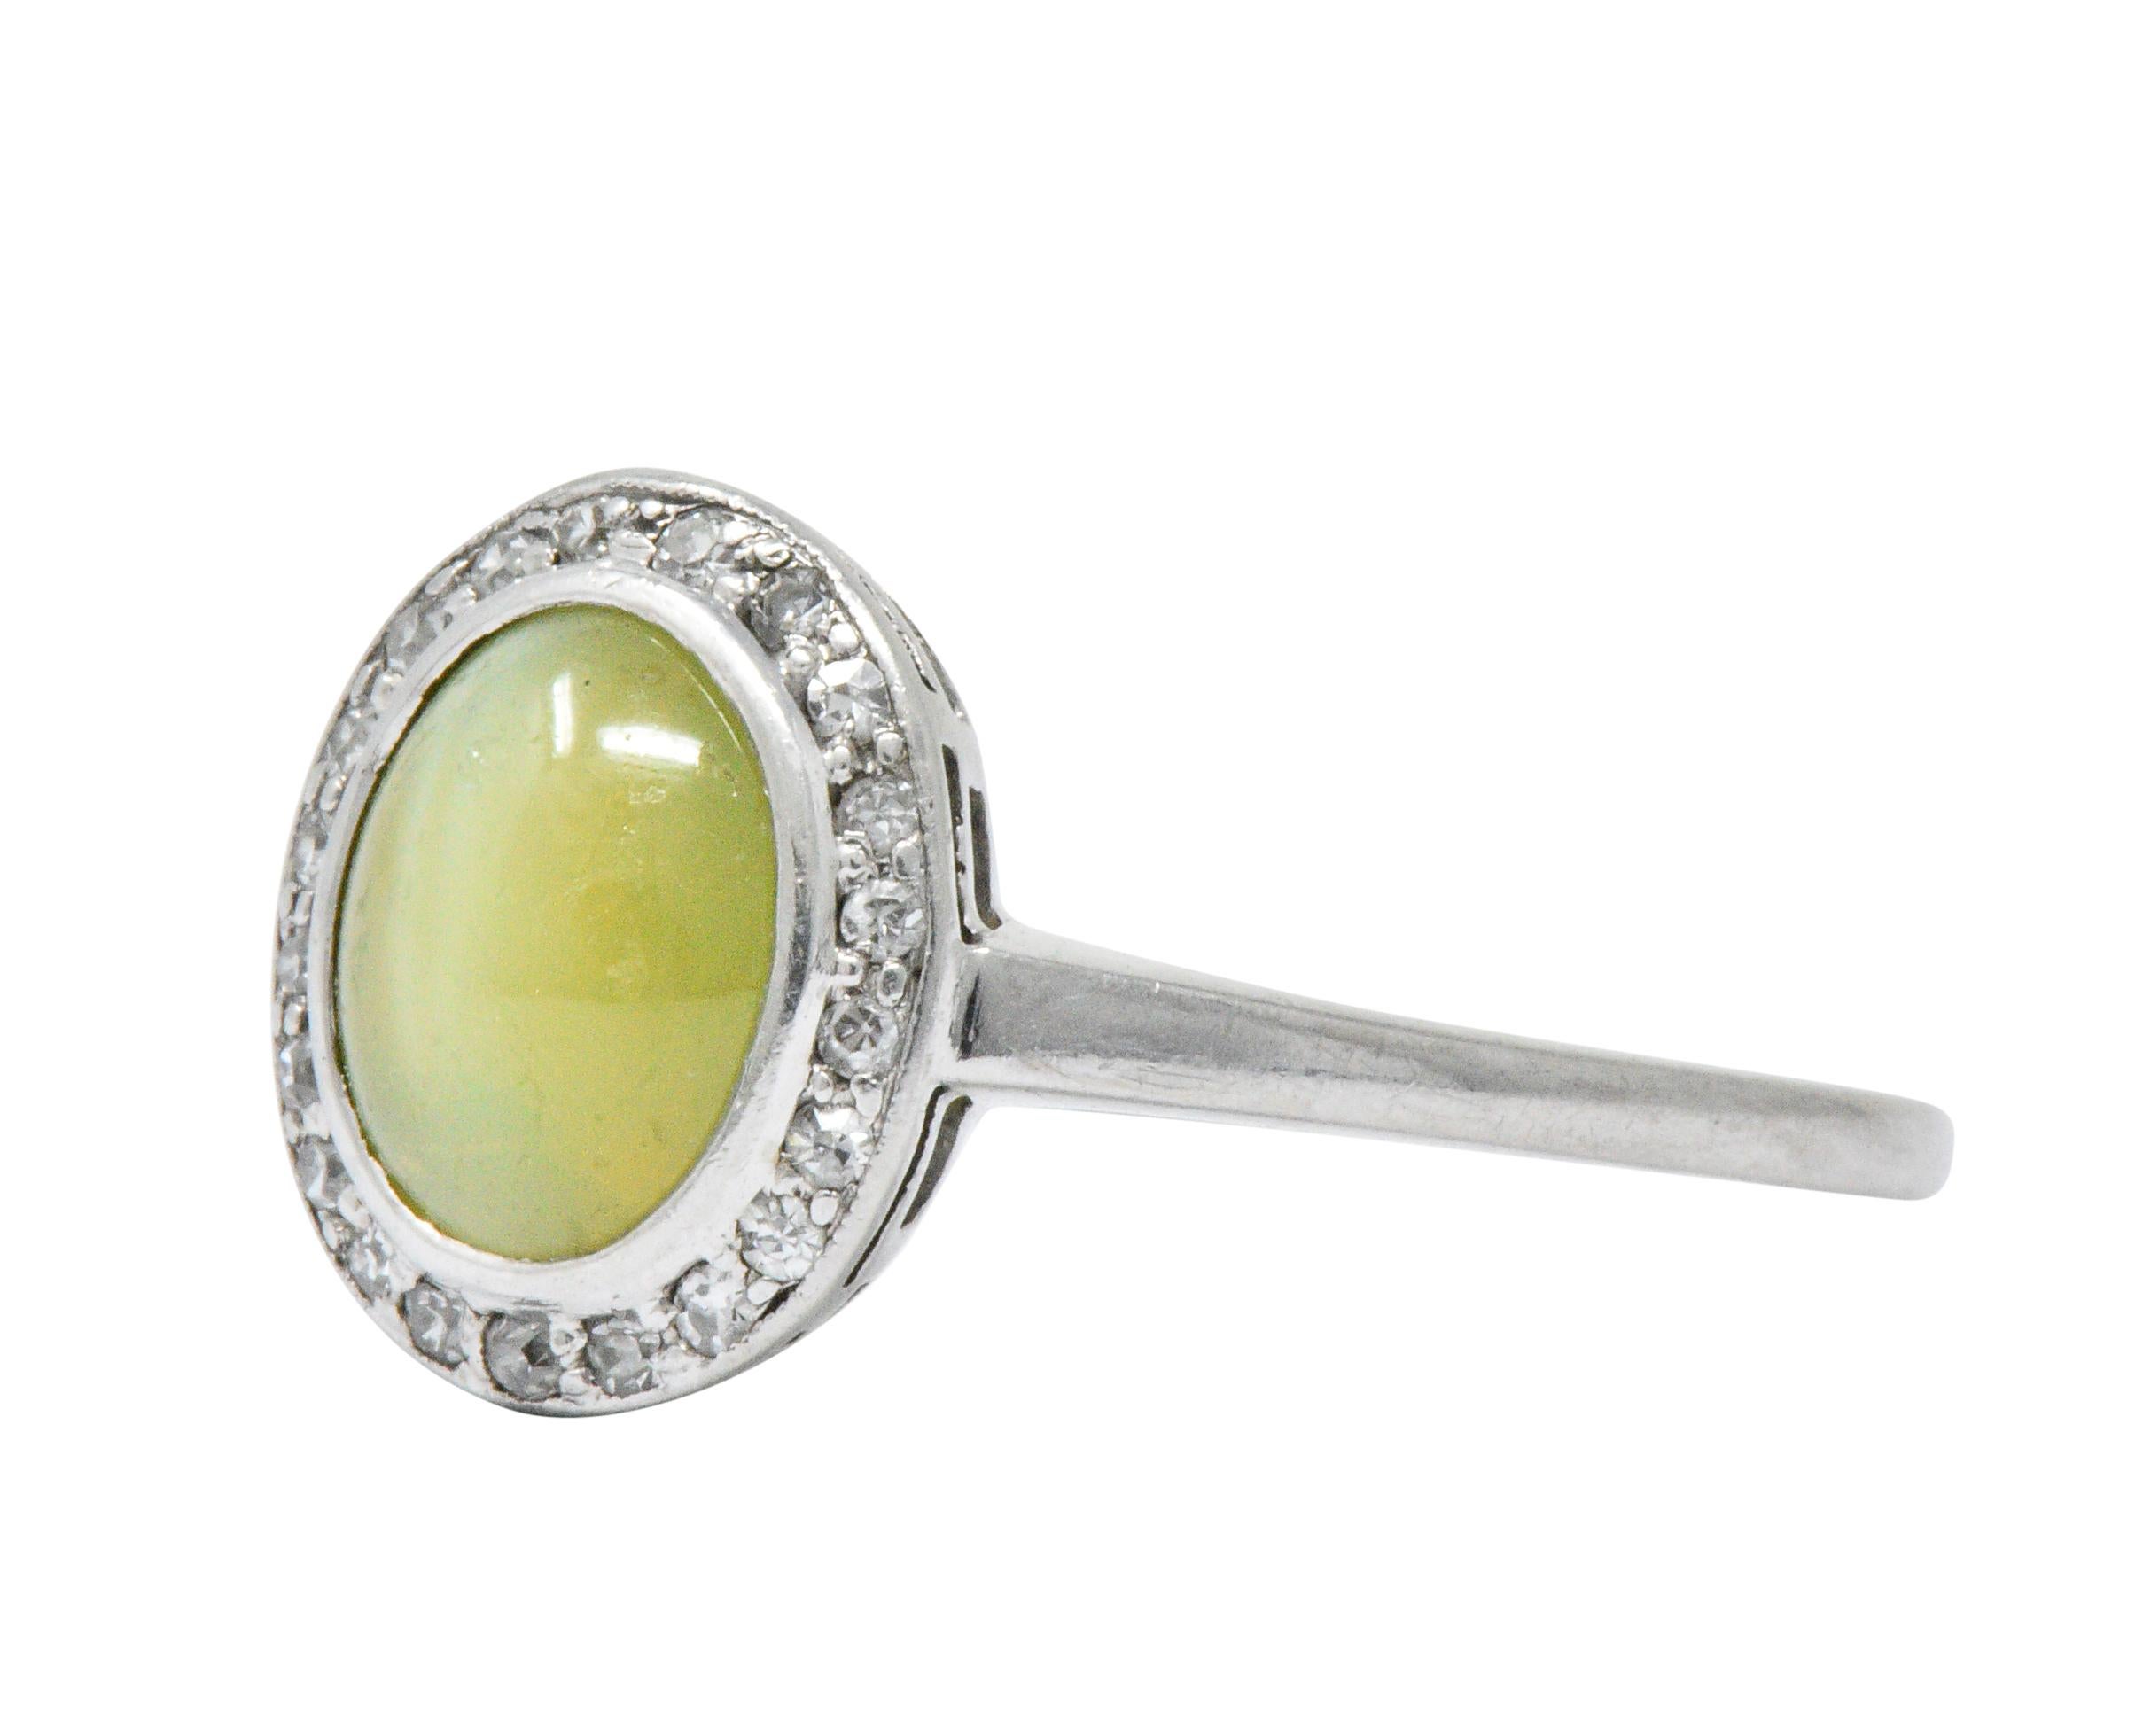 Centering a bezel set cat's eye chrysoberyl cabochon weighing approximately 2.20 carats

Translucent yellowish-green and bisected by a strongly chatoyant white line

Surrounded by a halo of single cut diamonds weighing approximately 0.10 carat